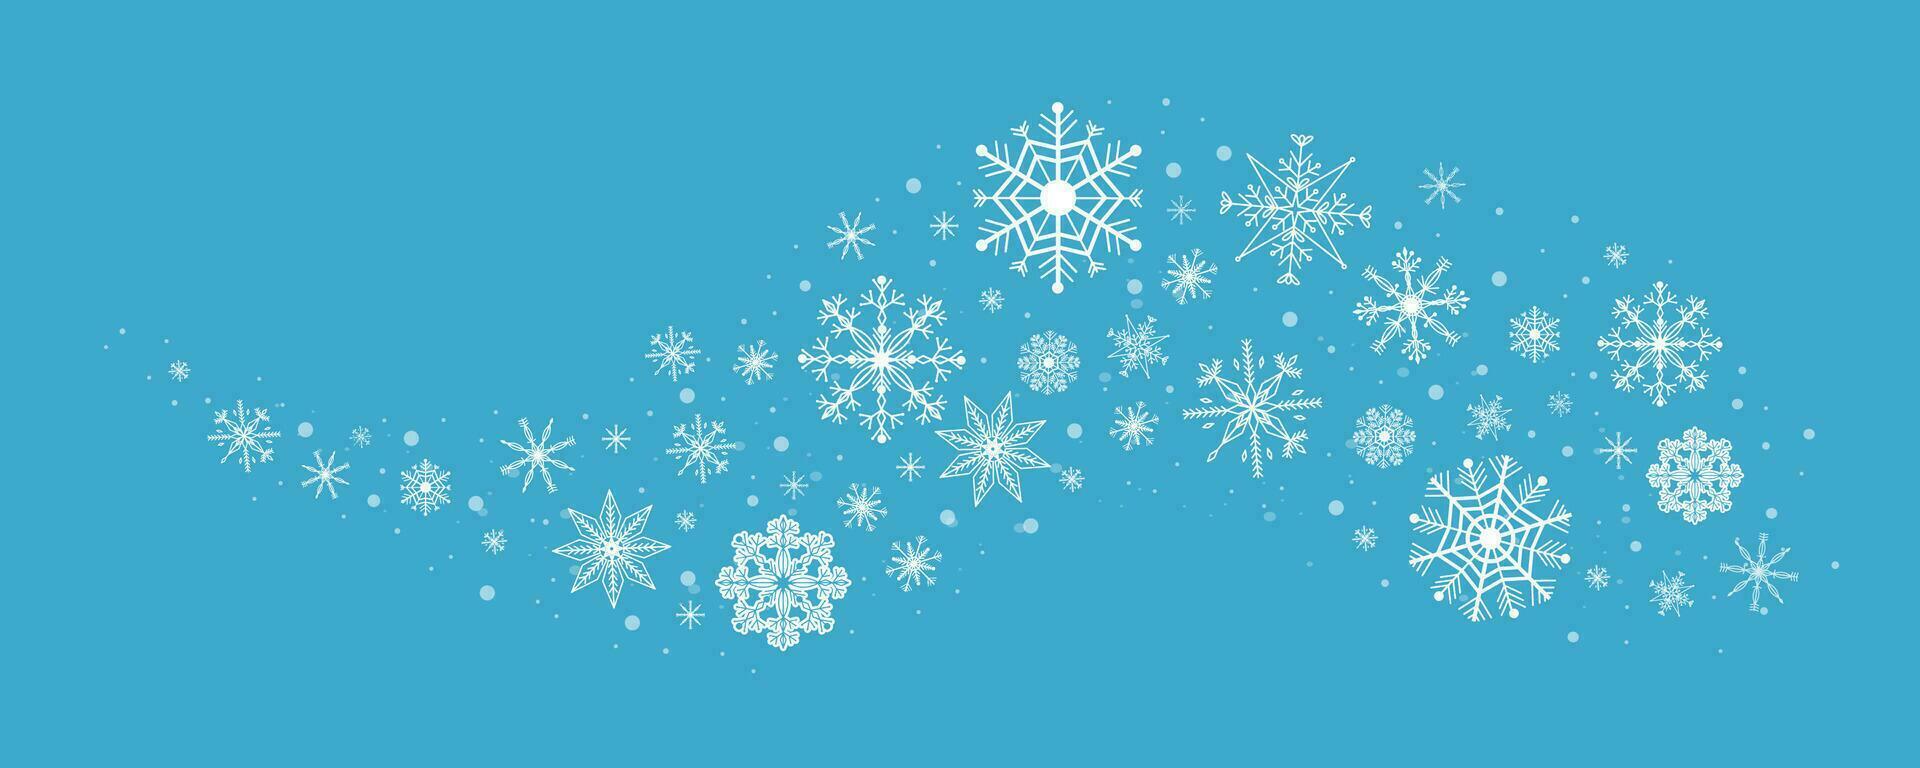 Wave snowflake swirl winter snow border ice decoration isolated. Holiday crystal curve shape design, magic ornament. Vector illustration